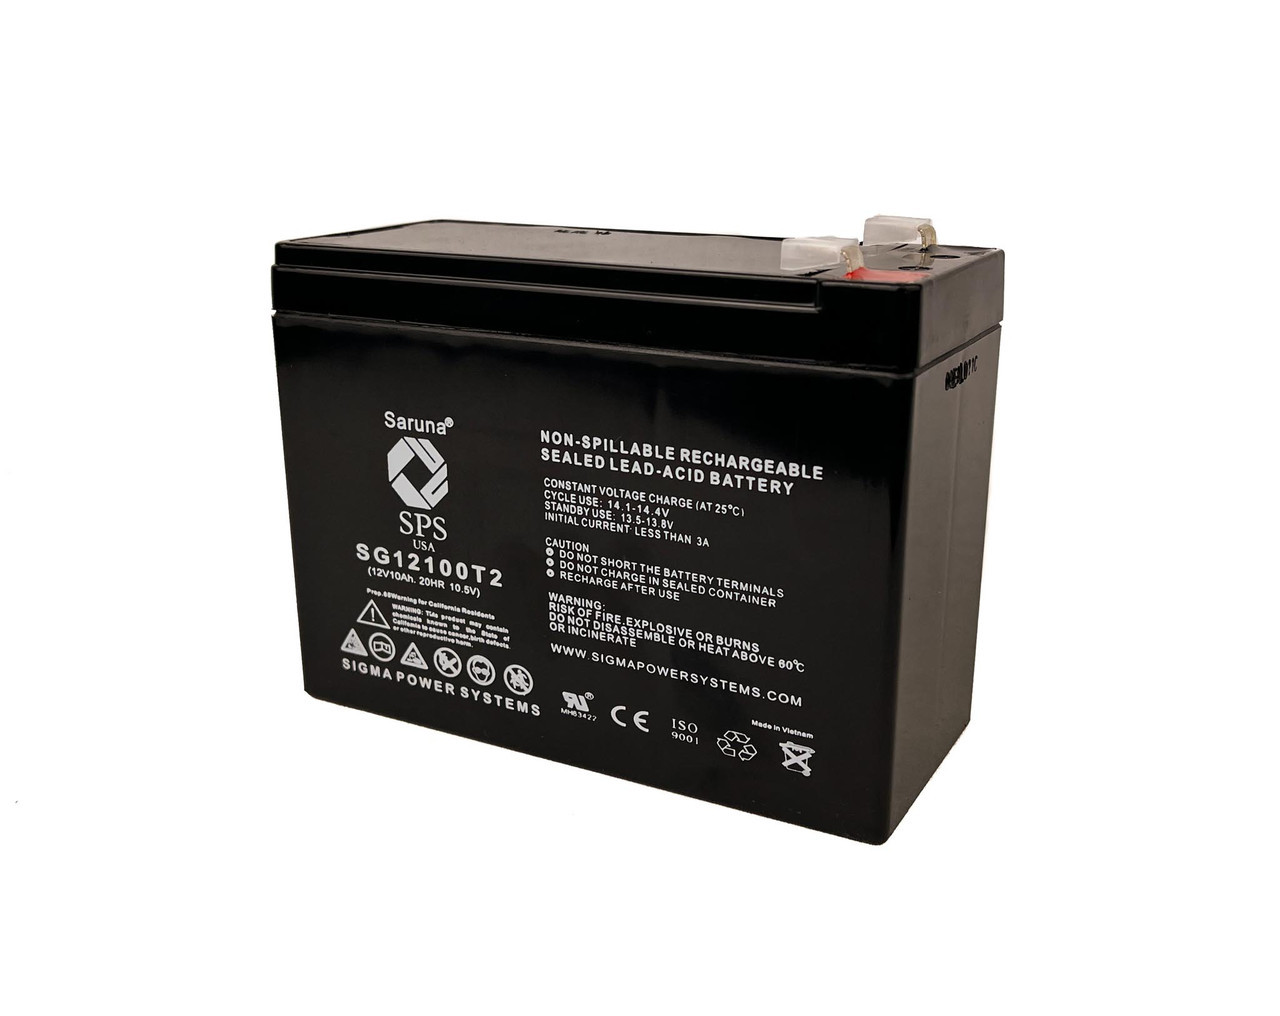 Raion Power 12V 10Ah Non-Spillable Replacement Rechargebale Battery for Shoprider Hero SL73N